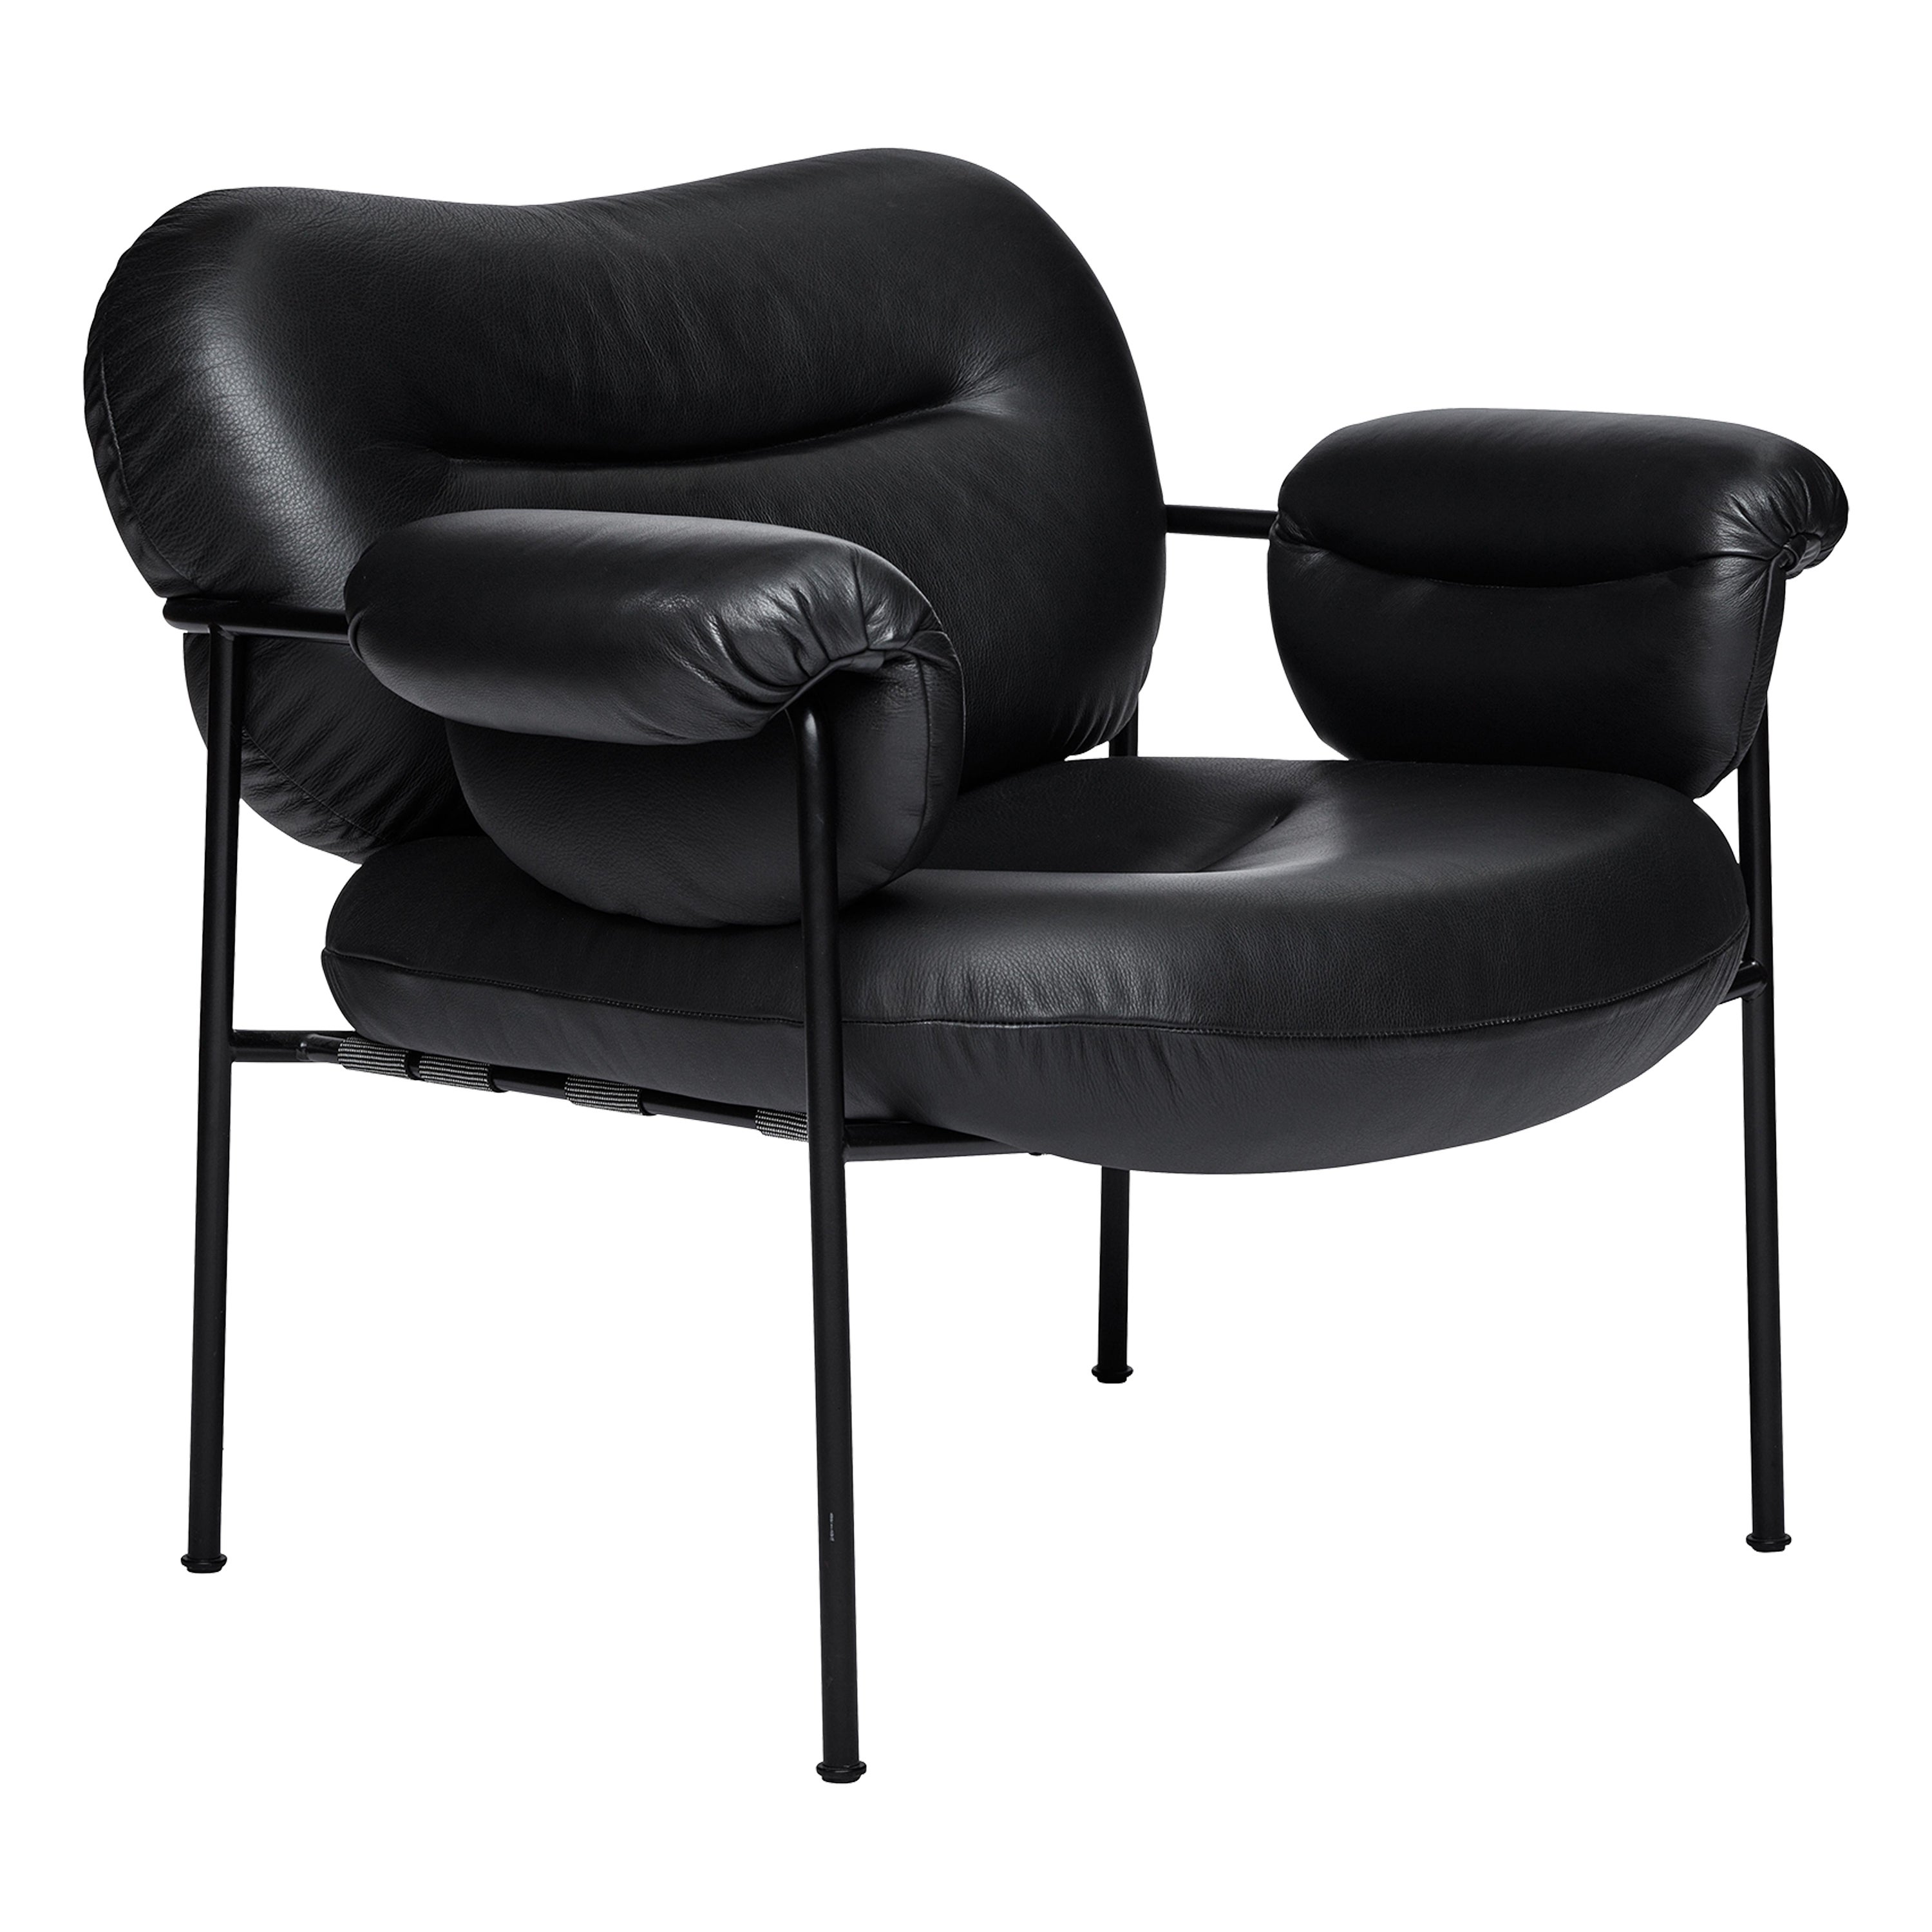 Bollo Armchair by Fogia, Black Leather Elmosoft, Black Steel For Sale